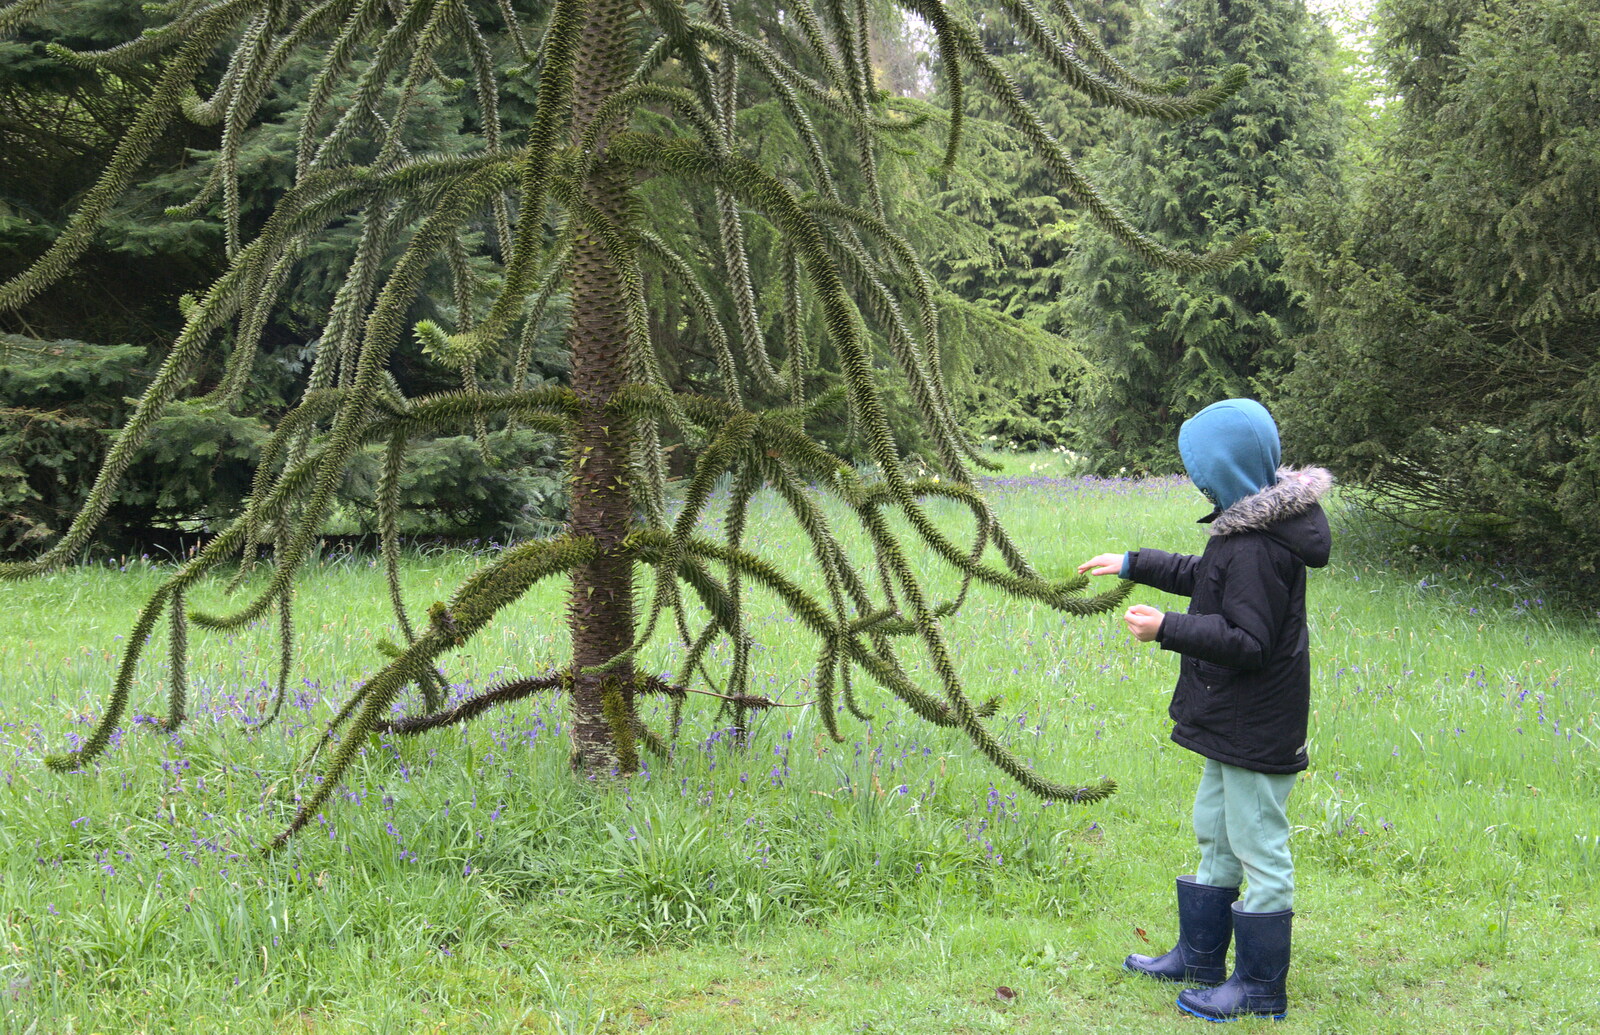 Fred pokes a Monkey Puzzle tree from A Trip to Blickling Hall, Aylsham, Norfolk - 29th April 2018